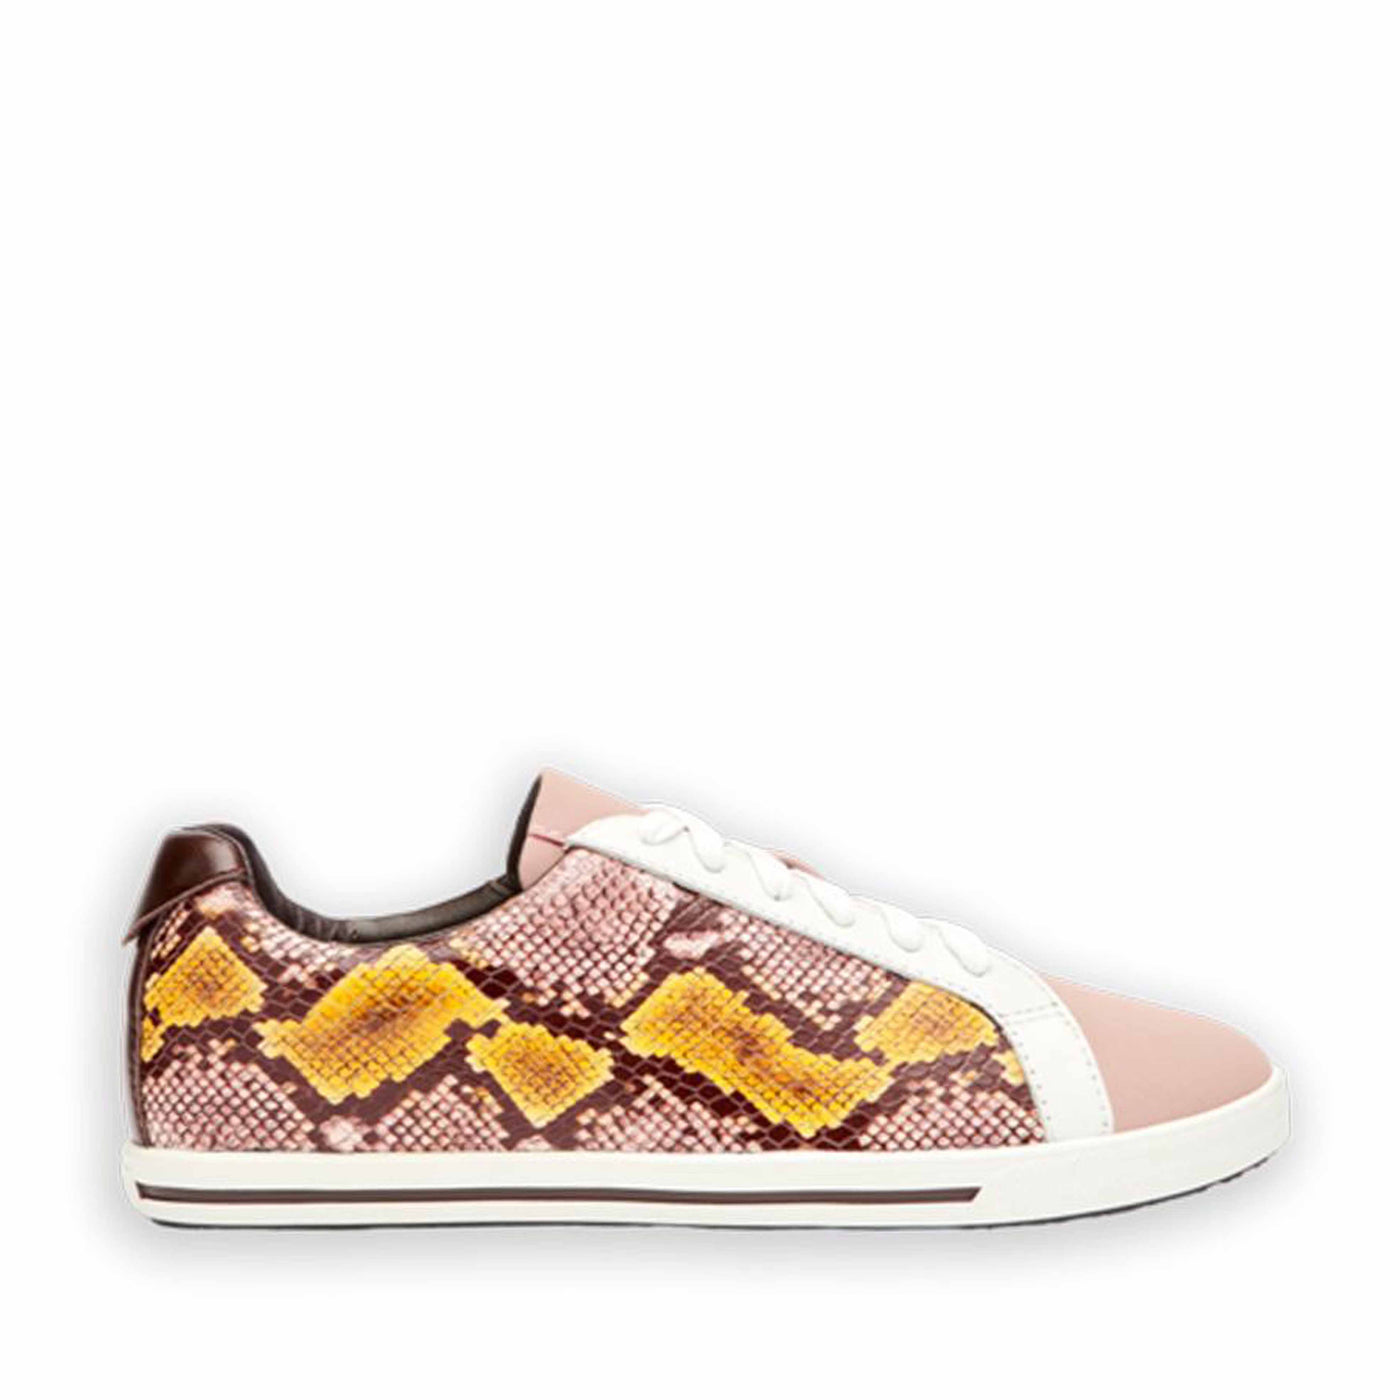 FRANKiE4 LUCY II MUSTARD PYTHON - FrankiE4 Women sneakers - Collective Shoes 